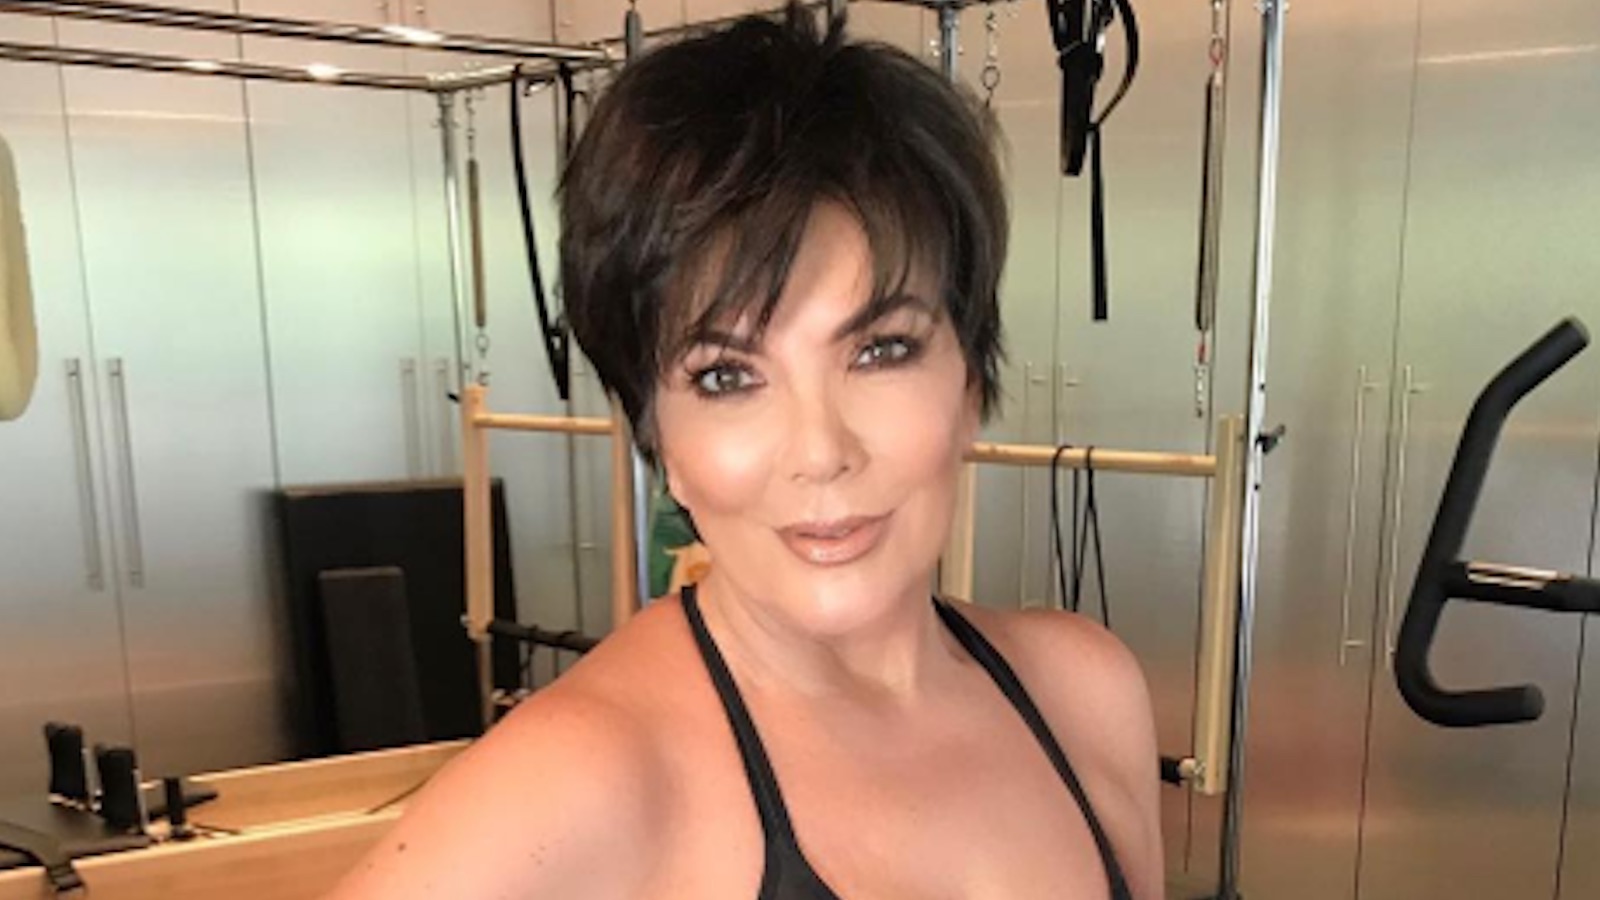 Kris Jenner posted a detox tea ad on Instagram and everyone lost their sh*t